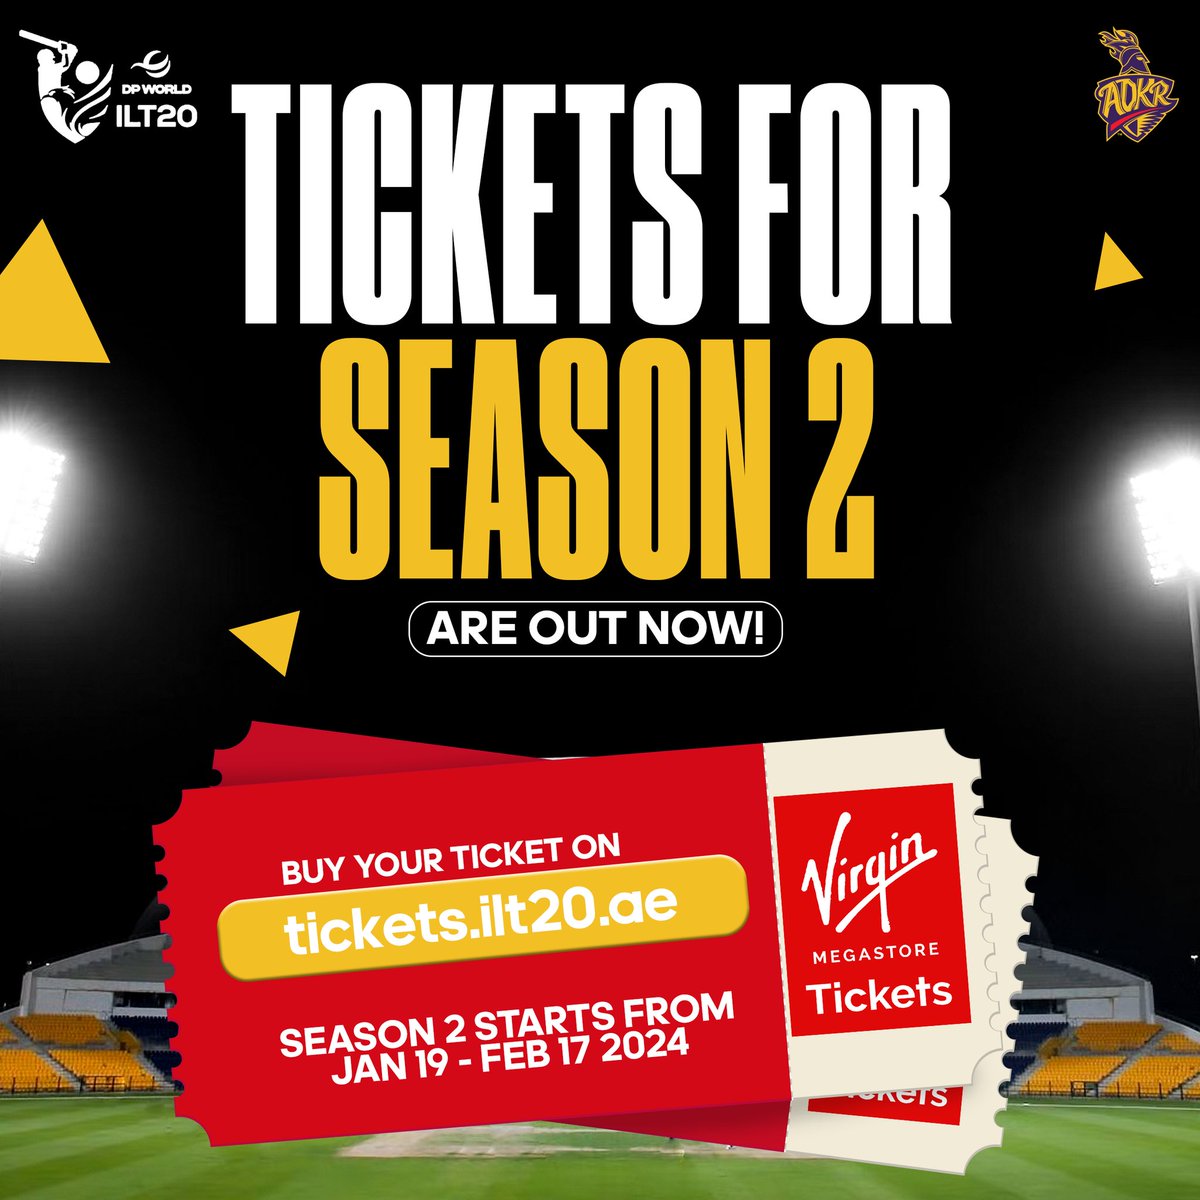 The Knights are coming back for Season 2 of #DPWorldILT20! 🤩 Grab your tickets now and enjoy the thrills of the most exciting cricket league - tickets.ilt20.ae